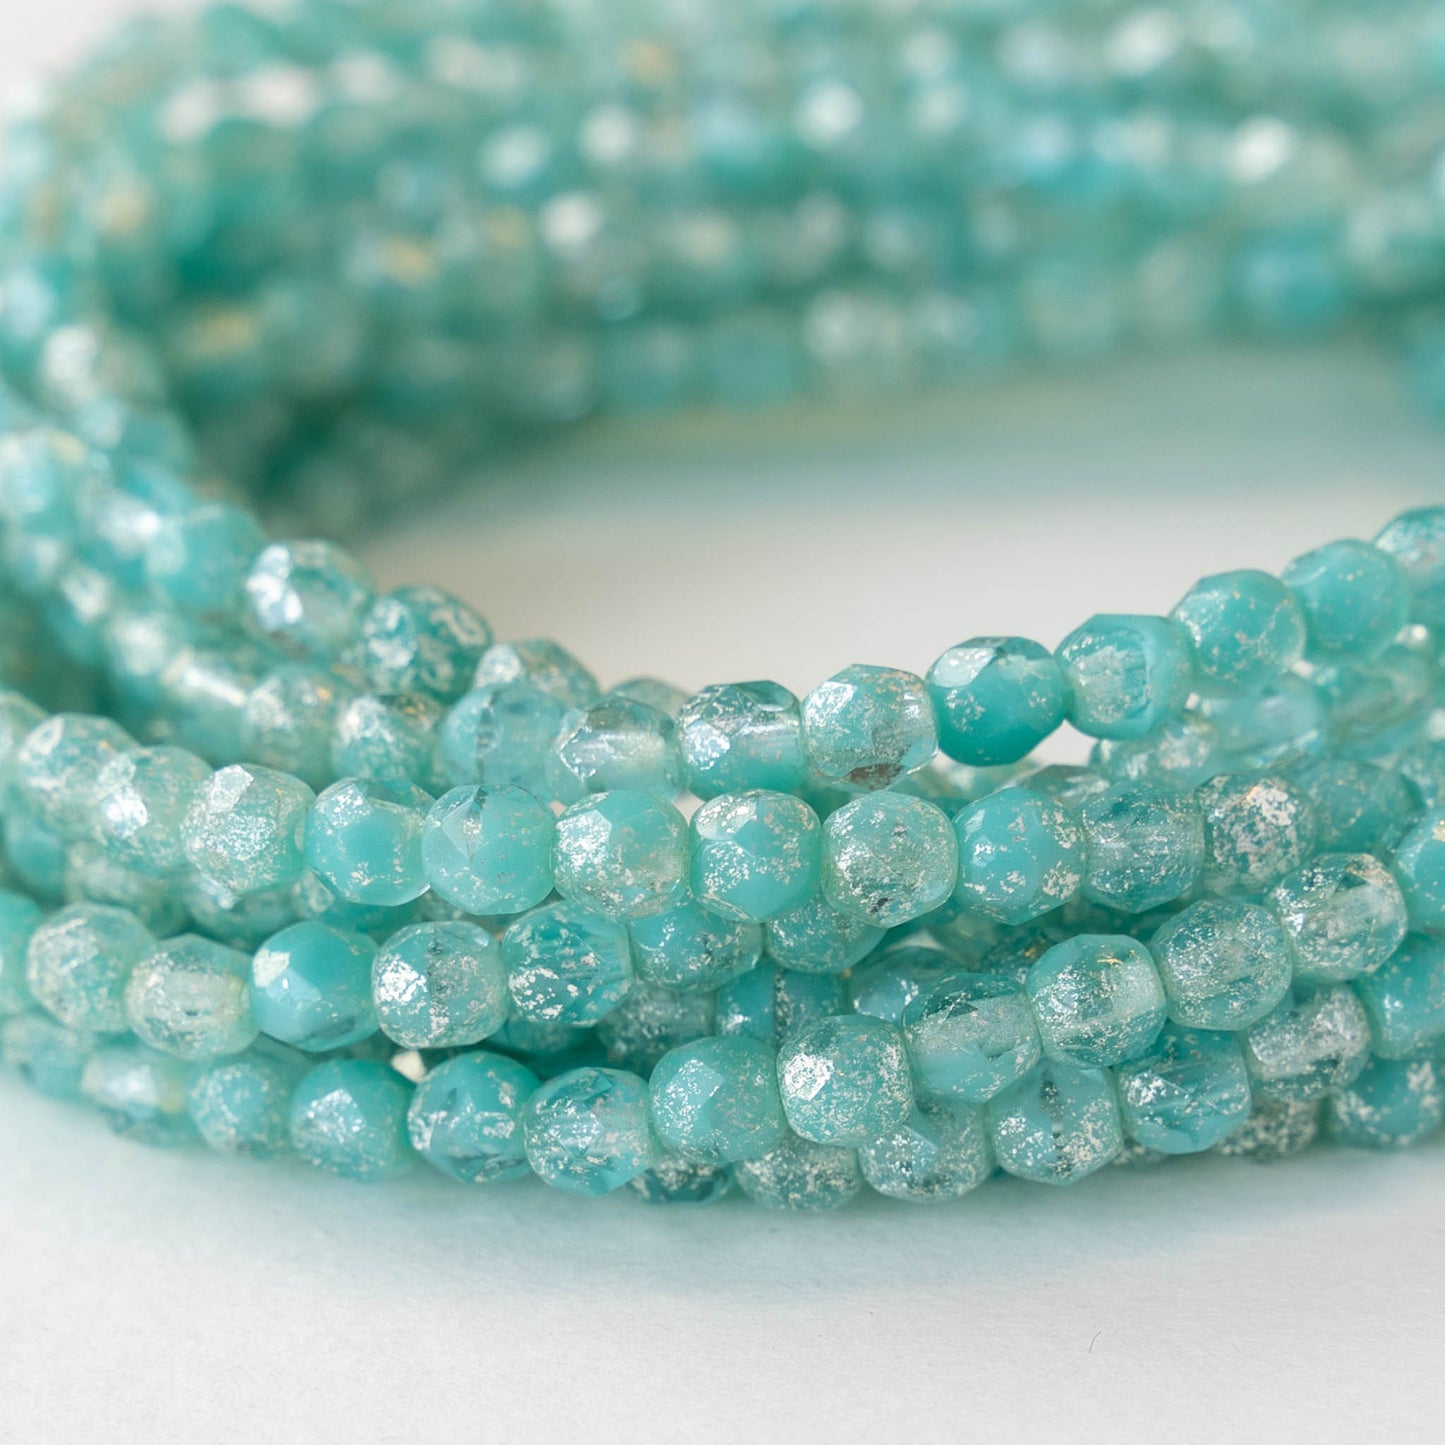 4mm Round Firepolished Beads - Aqua Mix with Silver Dust - 50 Beads